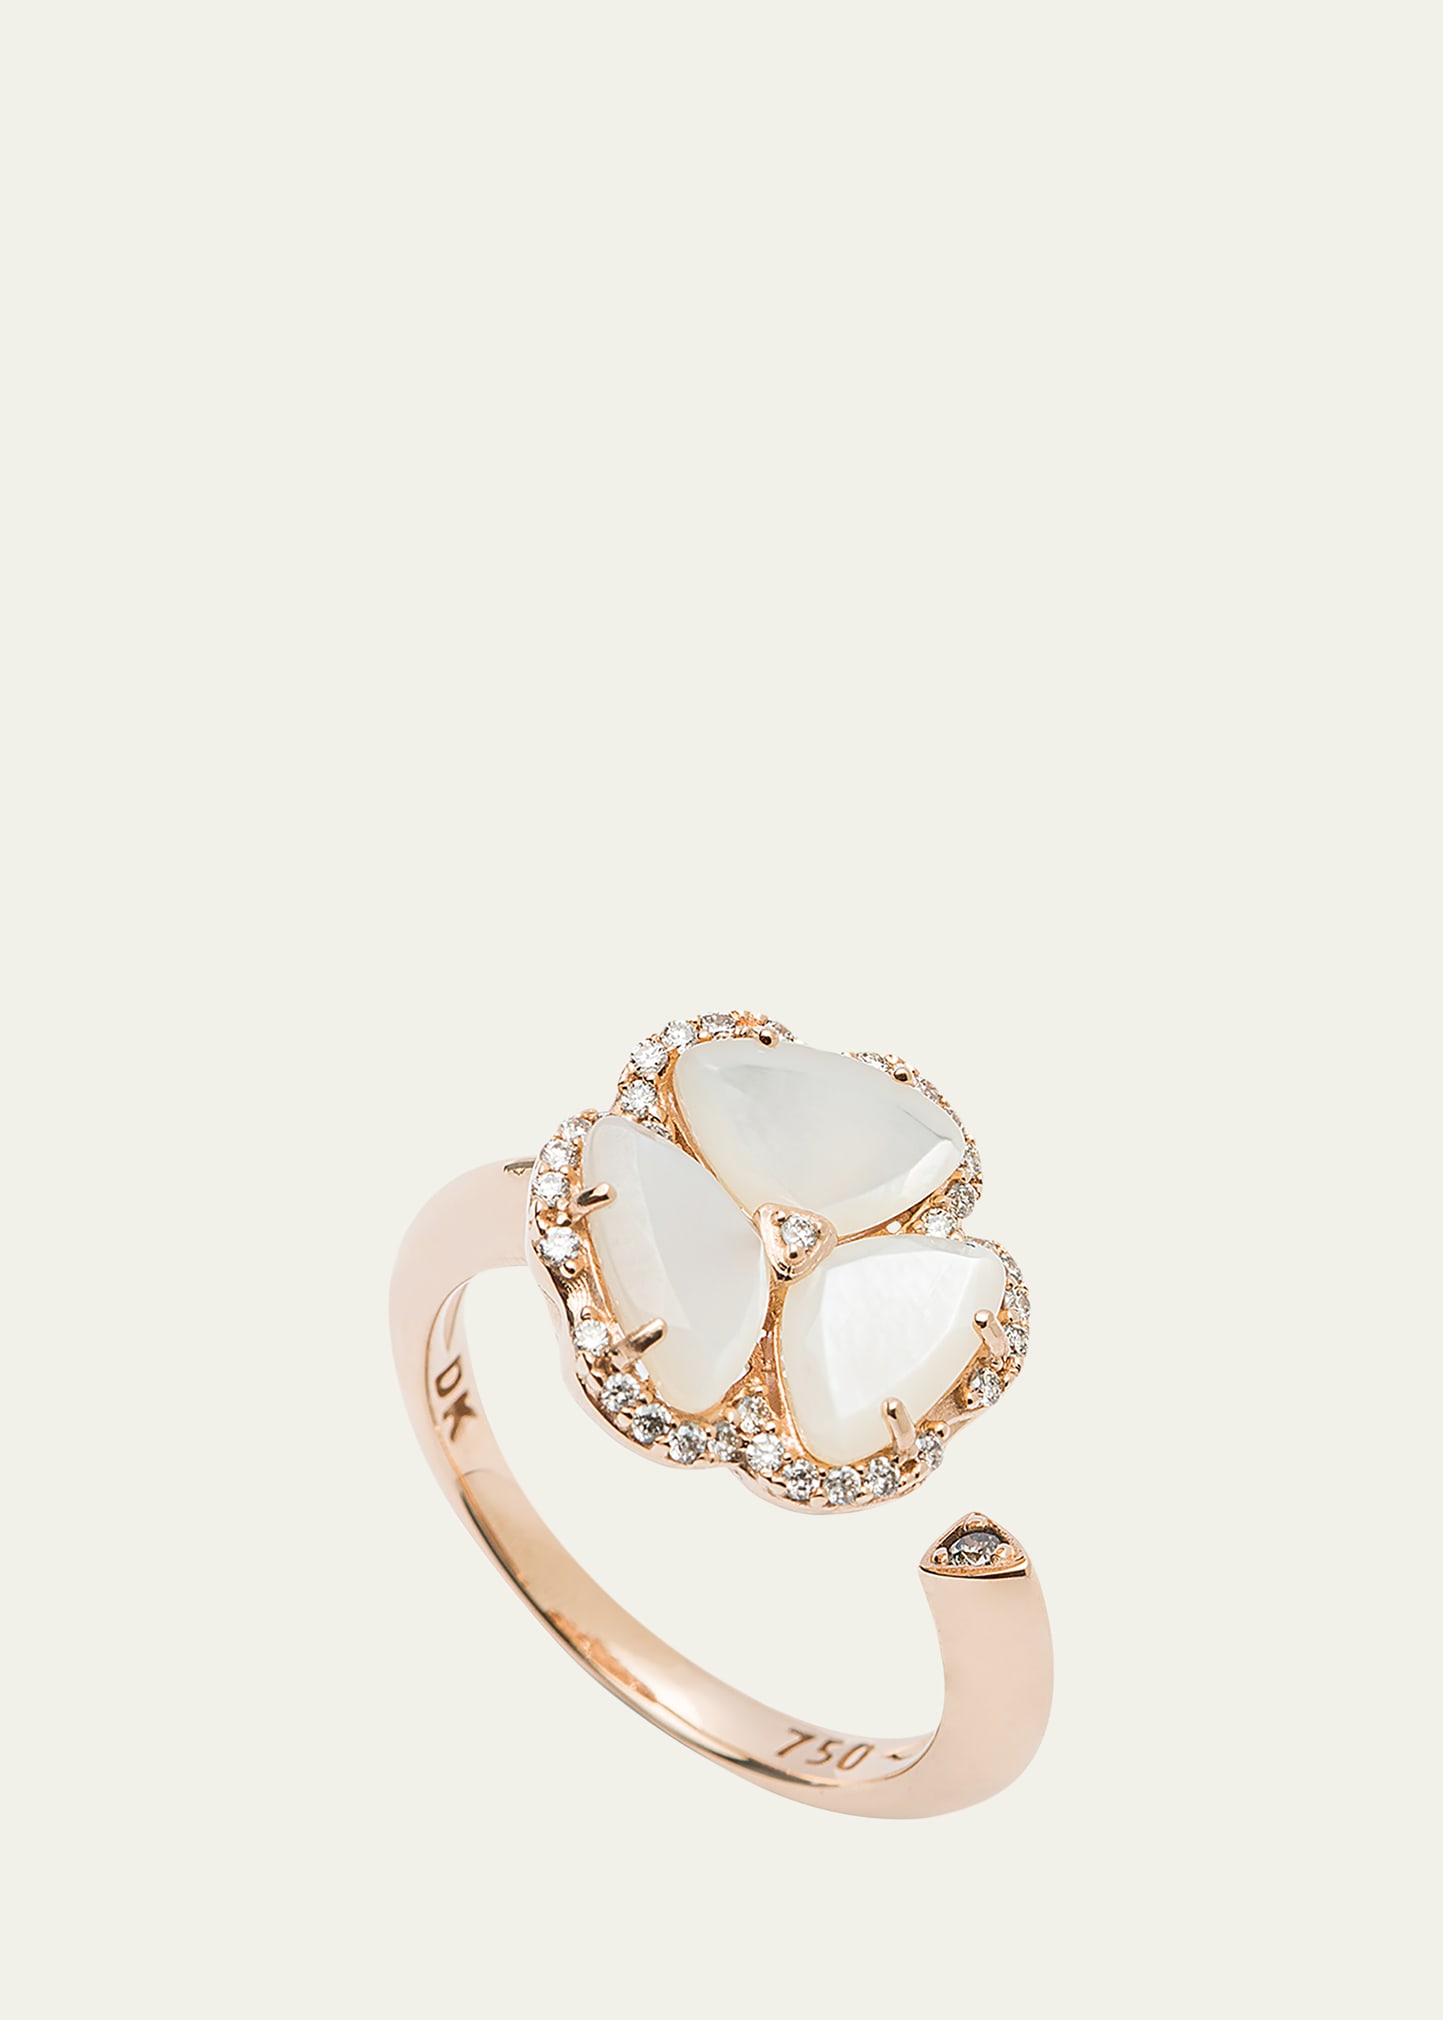 18K Rose Gold Flower Ring with Mother of Pearl and Diamonds